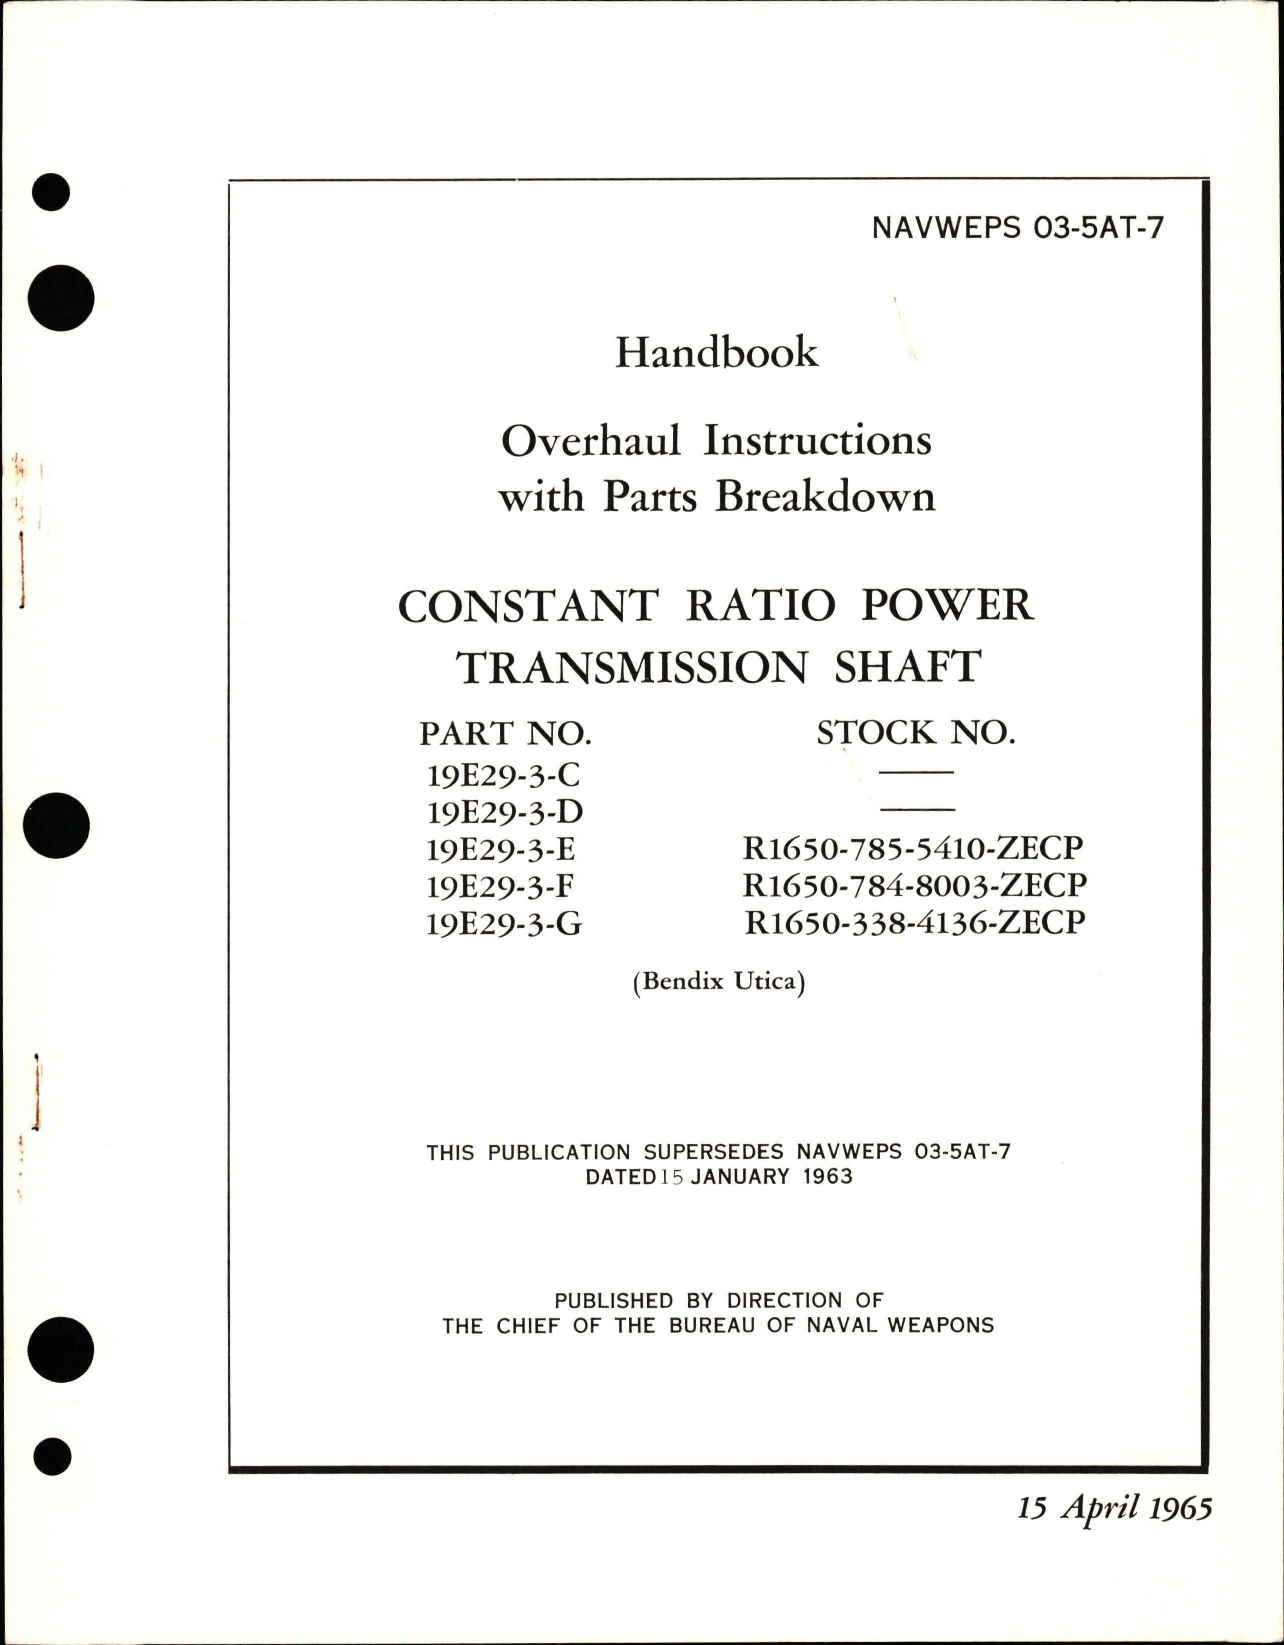 Sample page 1 from AirCorps Library document: Overhaul Instructions with Parts Breakdown for Constant Ratio Power Transmission Shaft - Part 19E29-3-C, -D, -E, -F, -G 